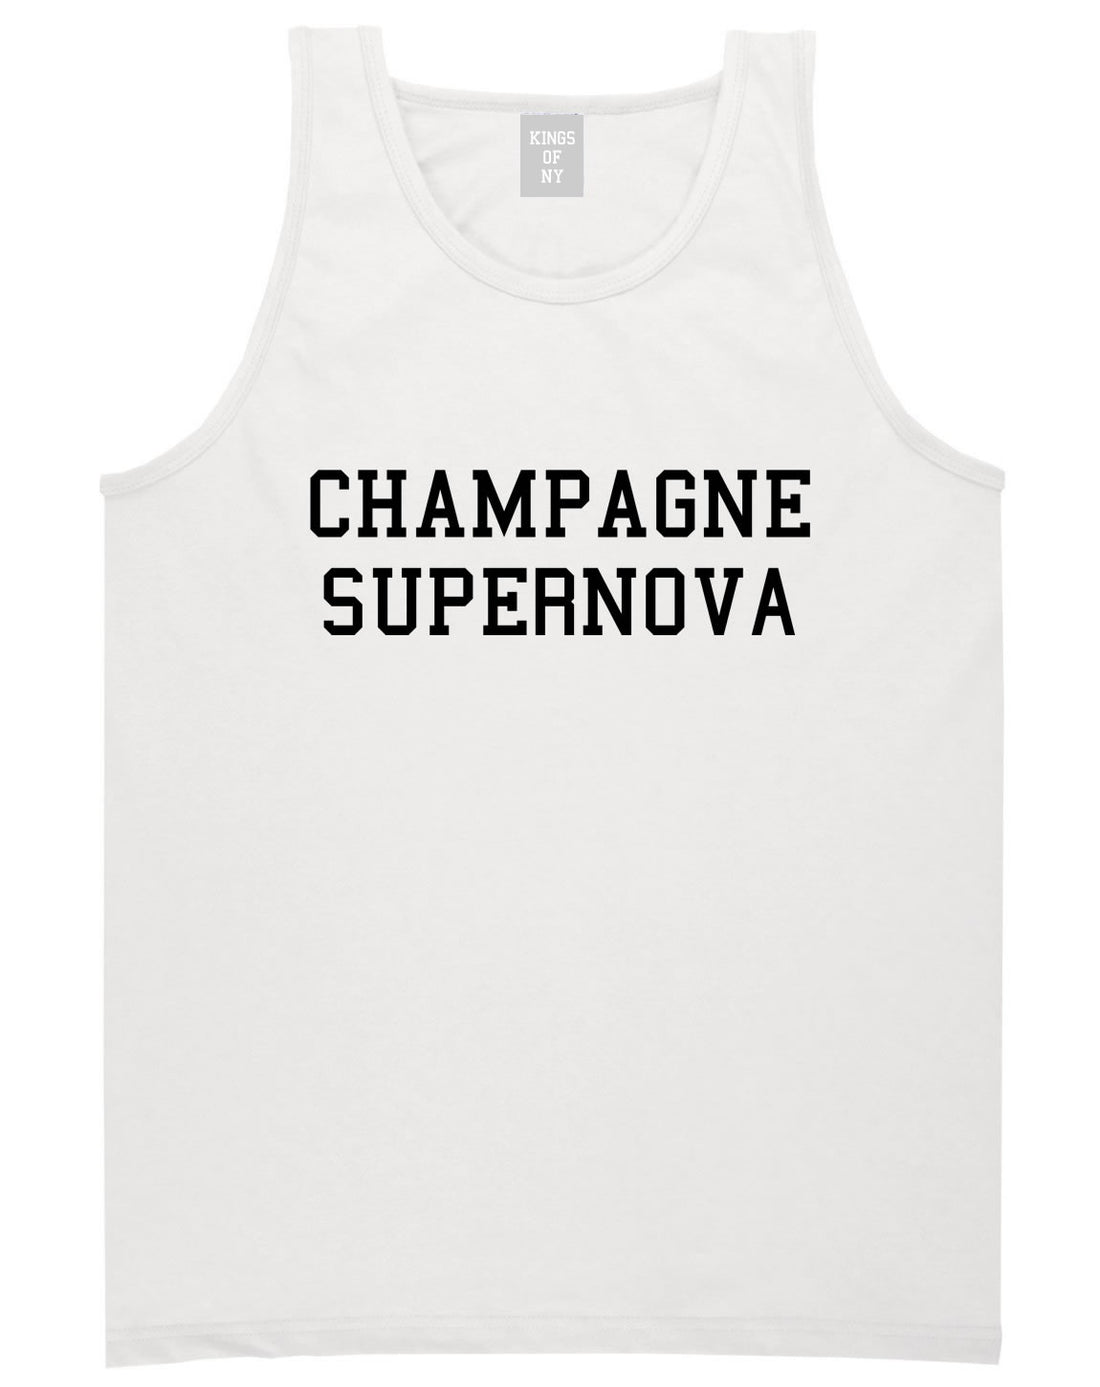 Champagne Supernova Tank Top in White by Kings Of NY